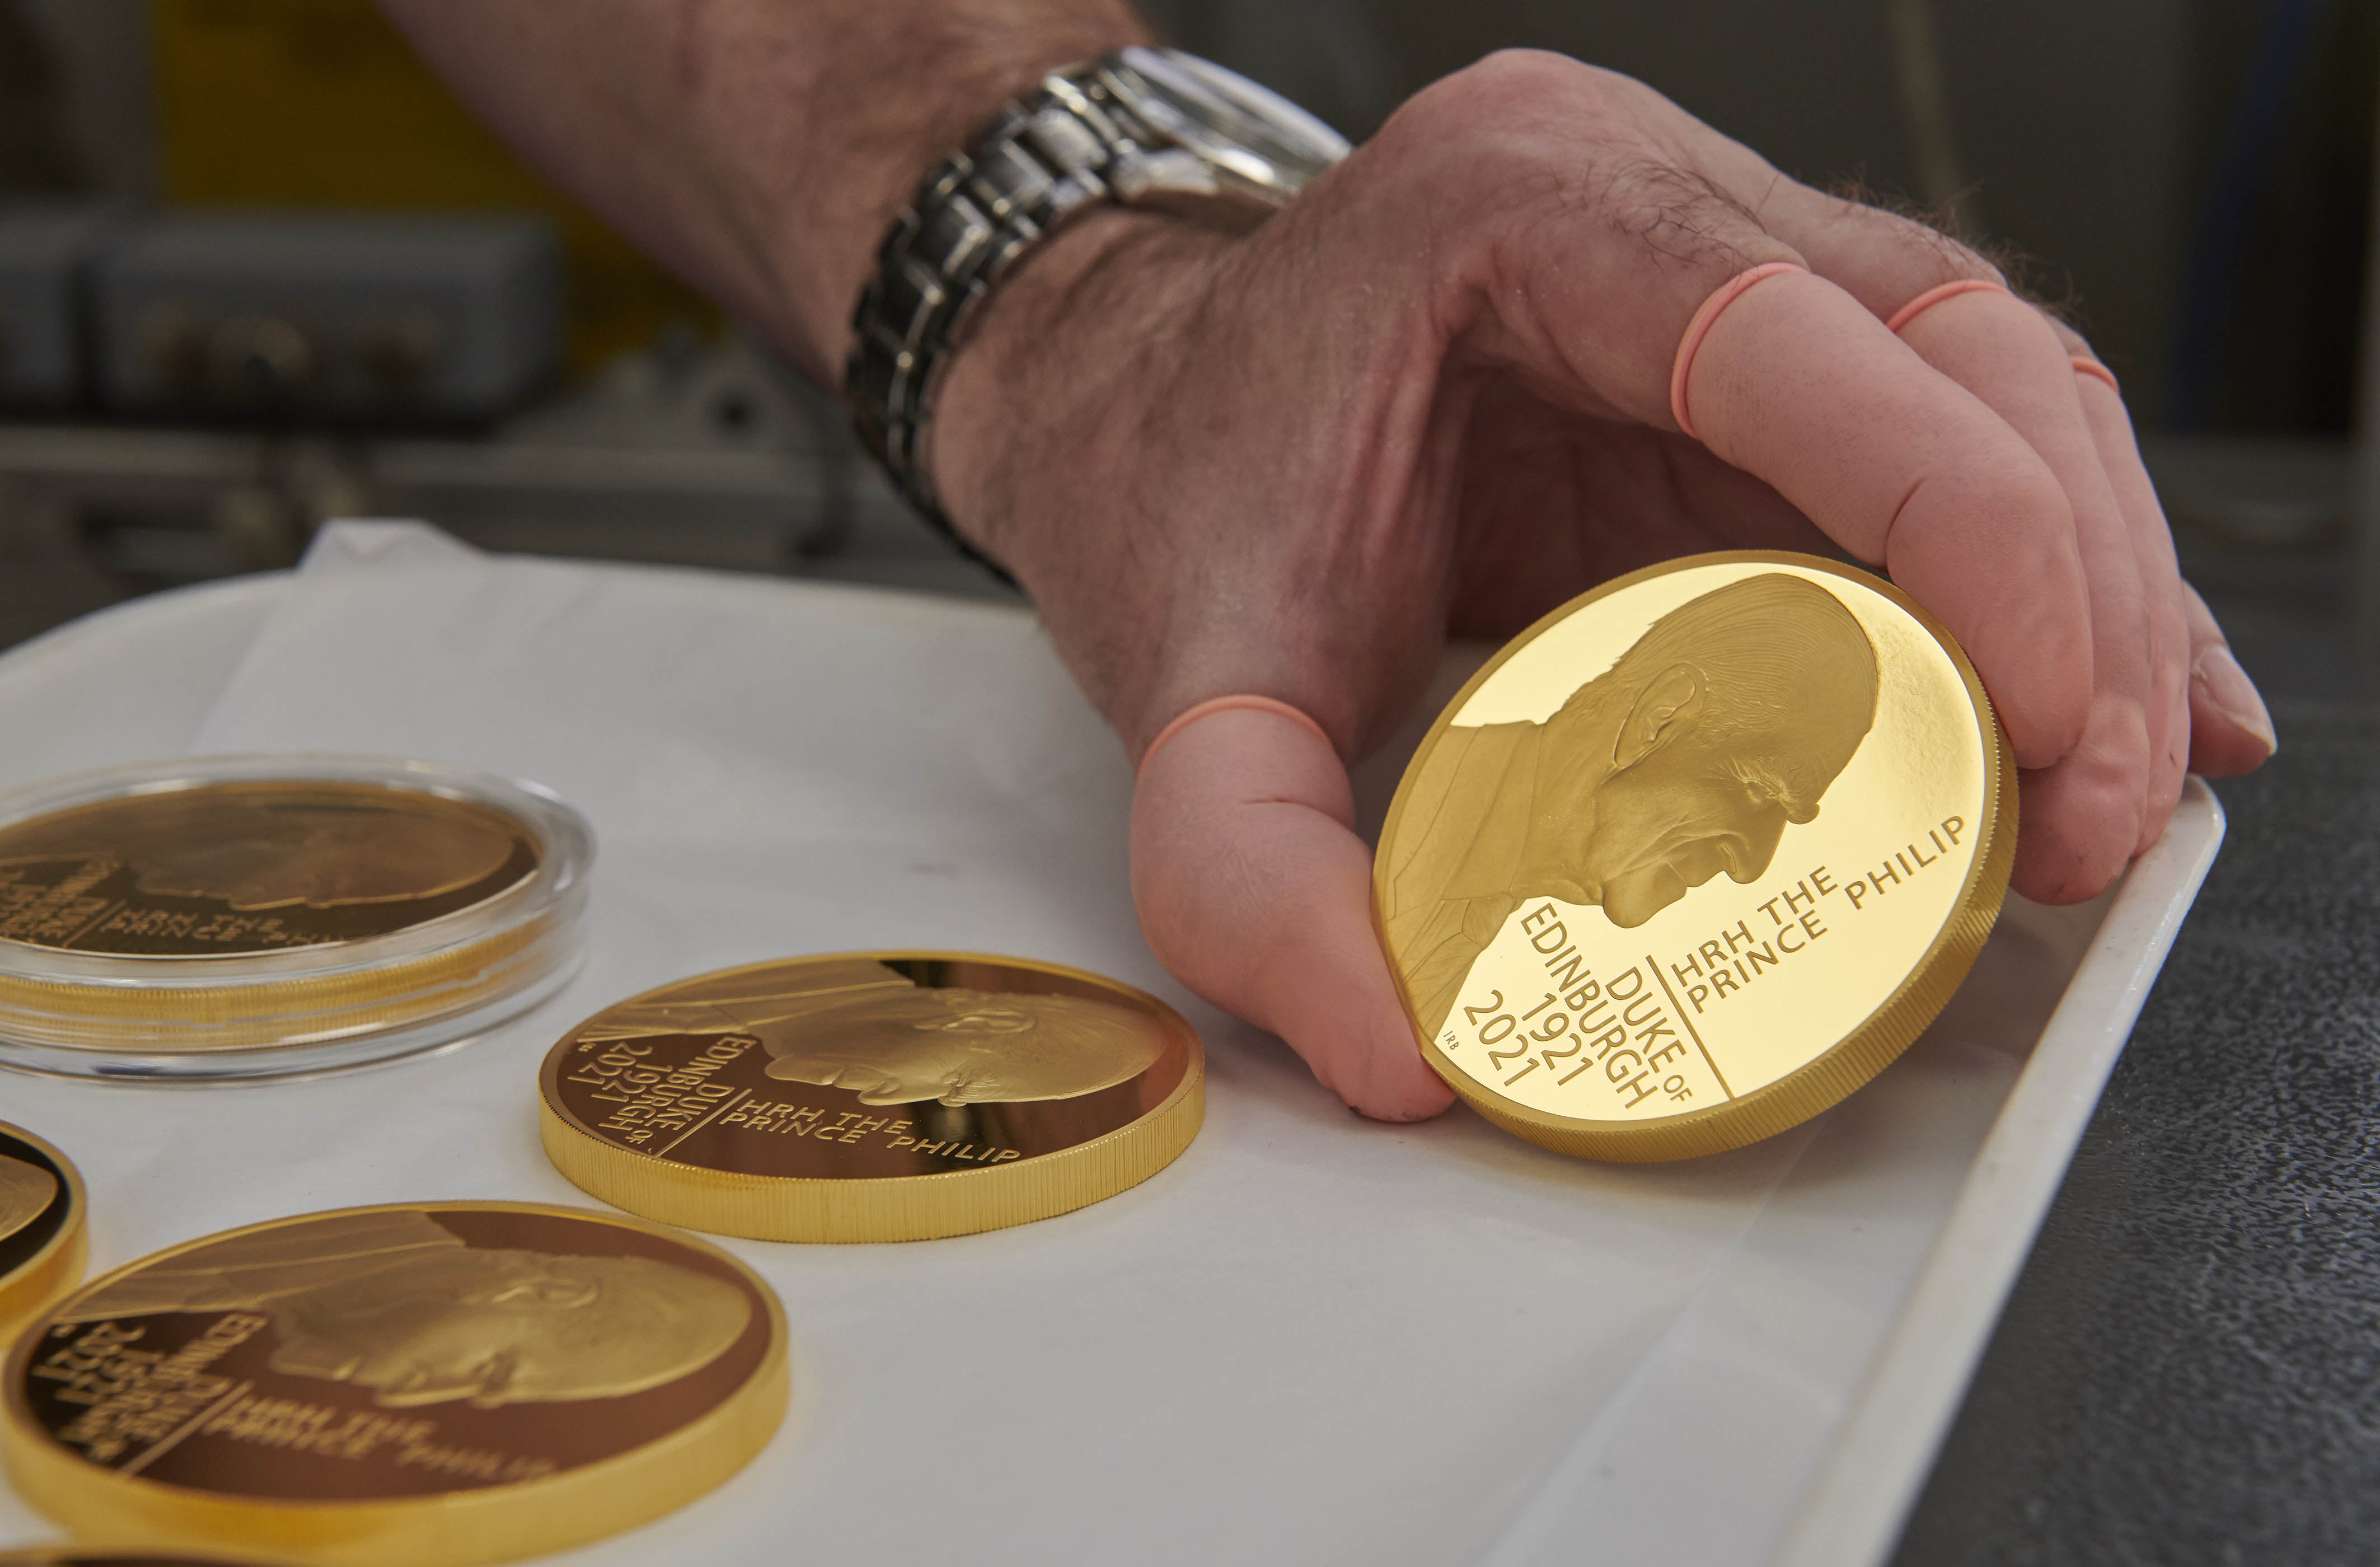 A gold coin commemorating the life of the Duke of Edinburgh